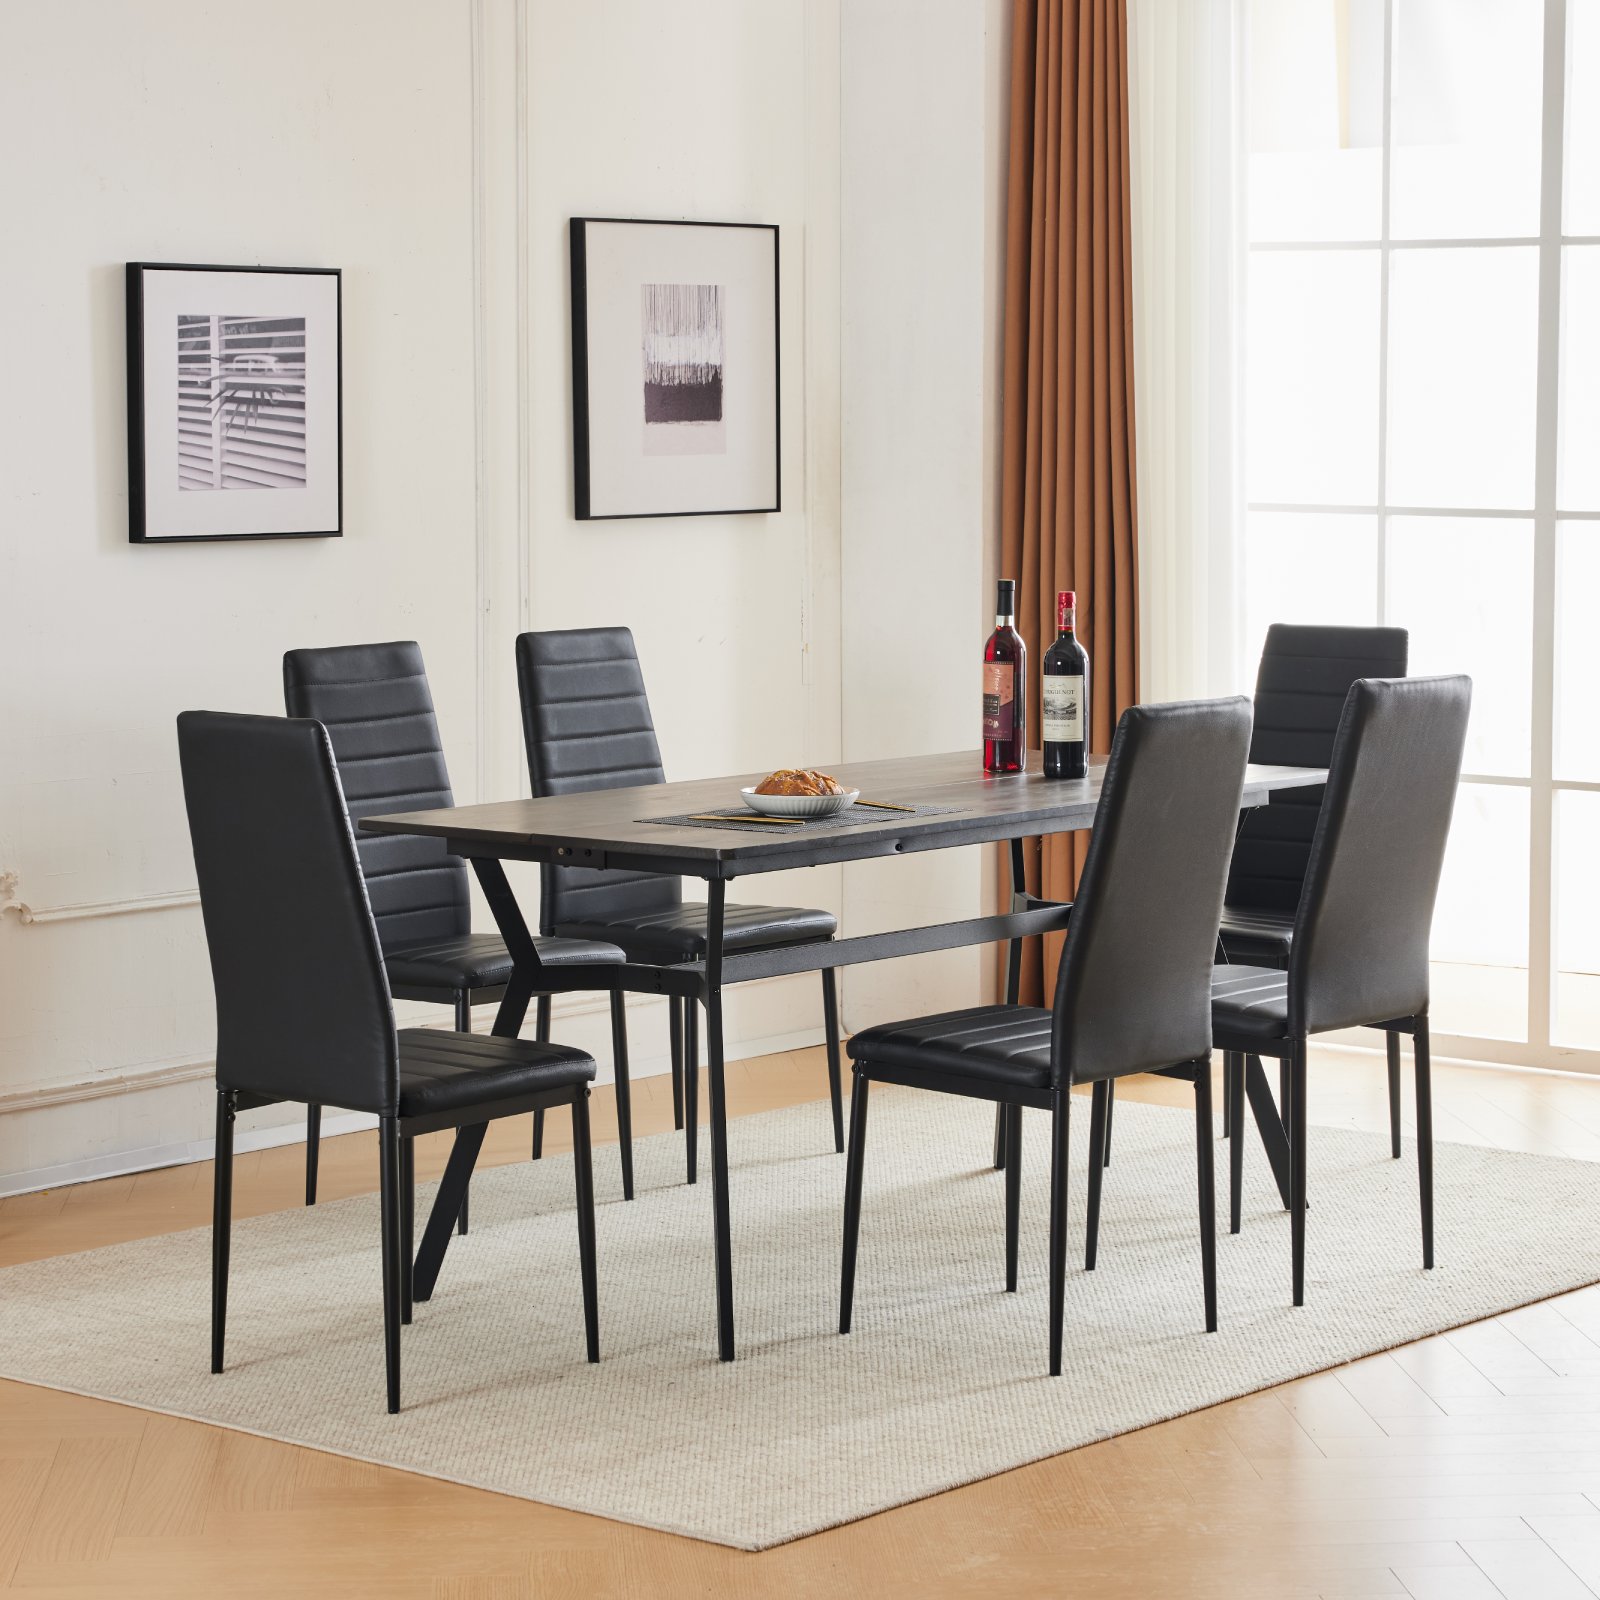 Lexington Large Wood Dining Set with 6 Ladder Back Chairs, White ...